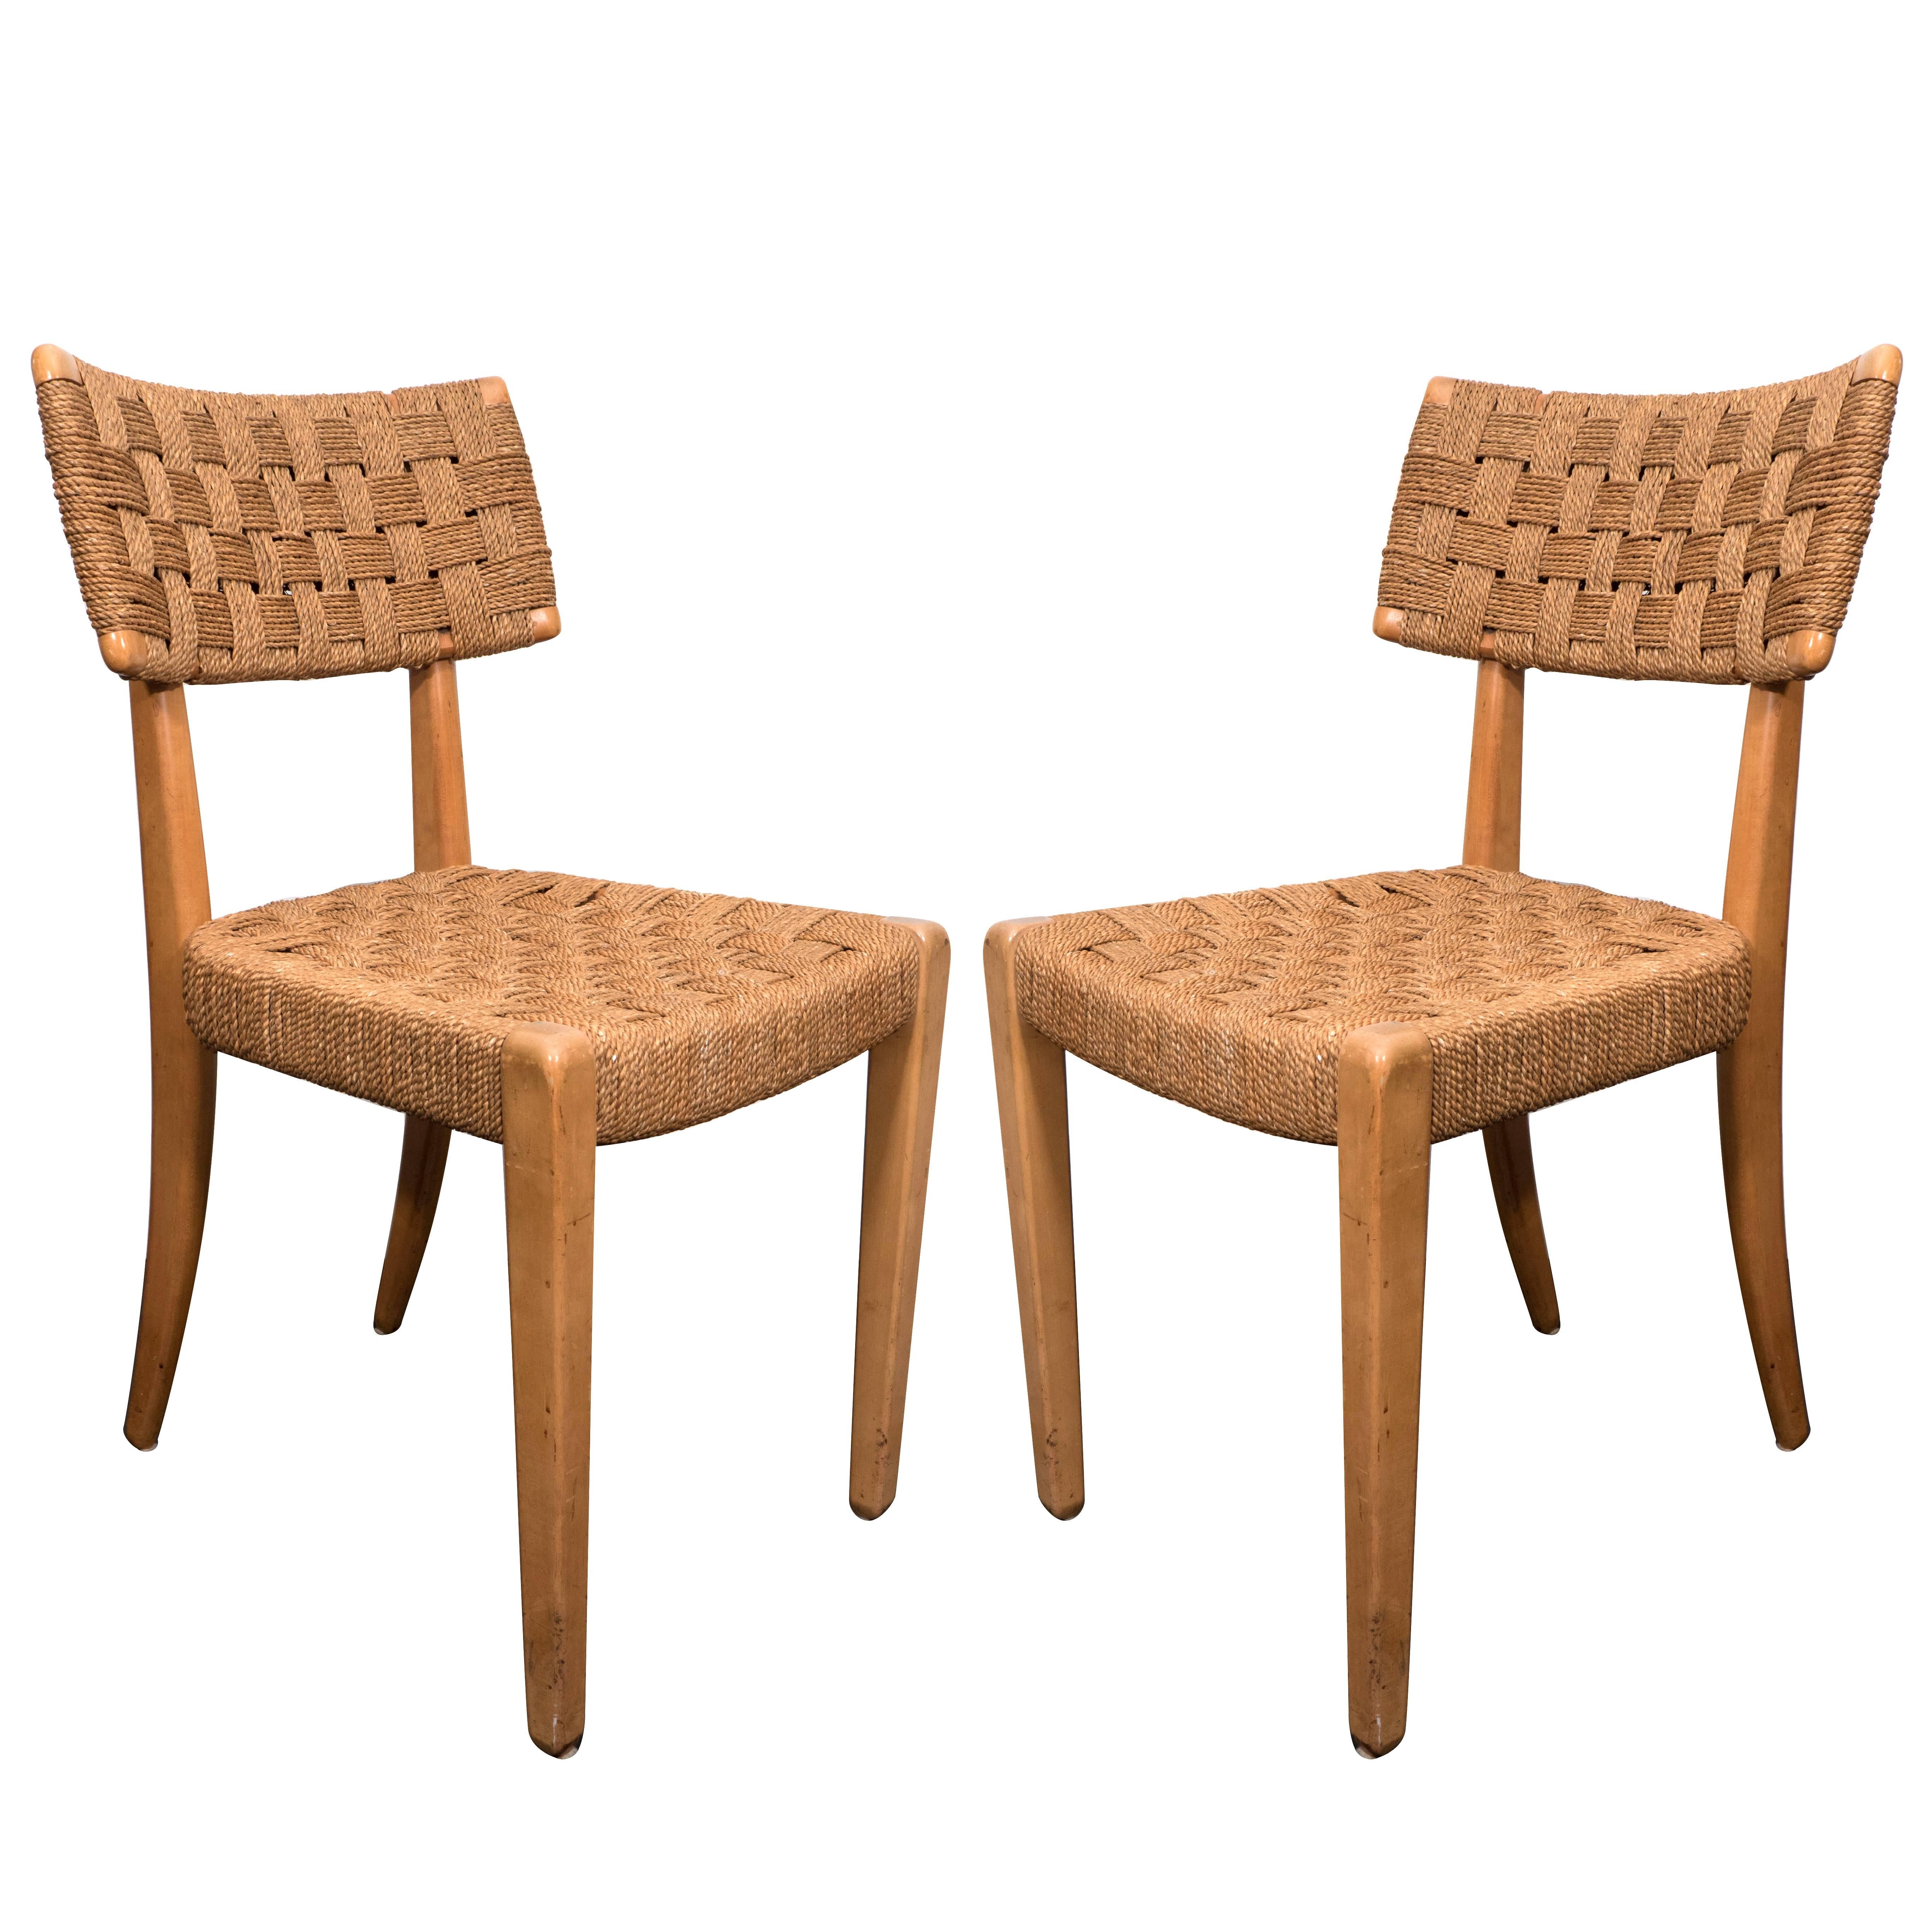 Pair of Raffia Woven Oak Chairs For Sale